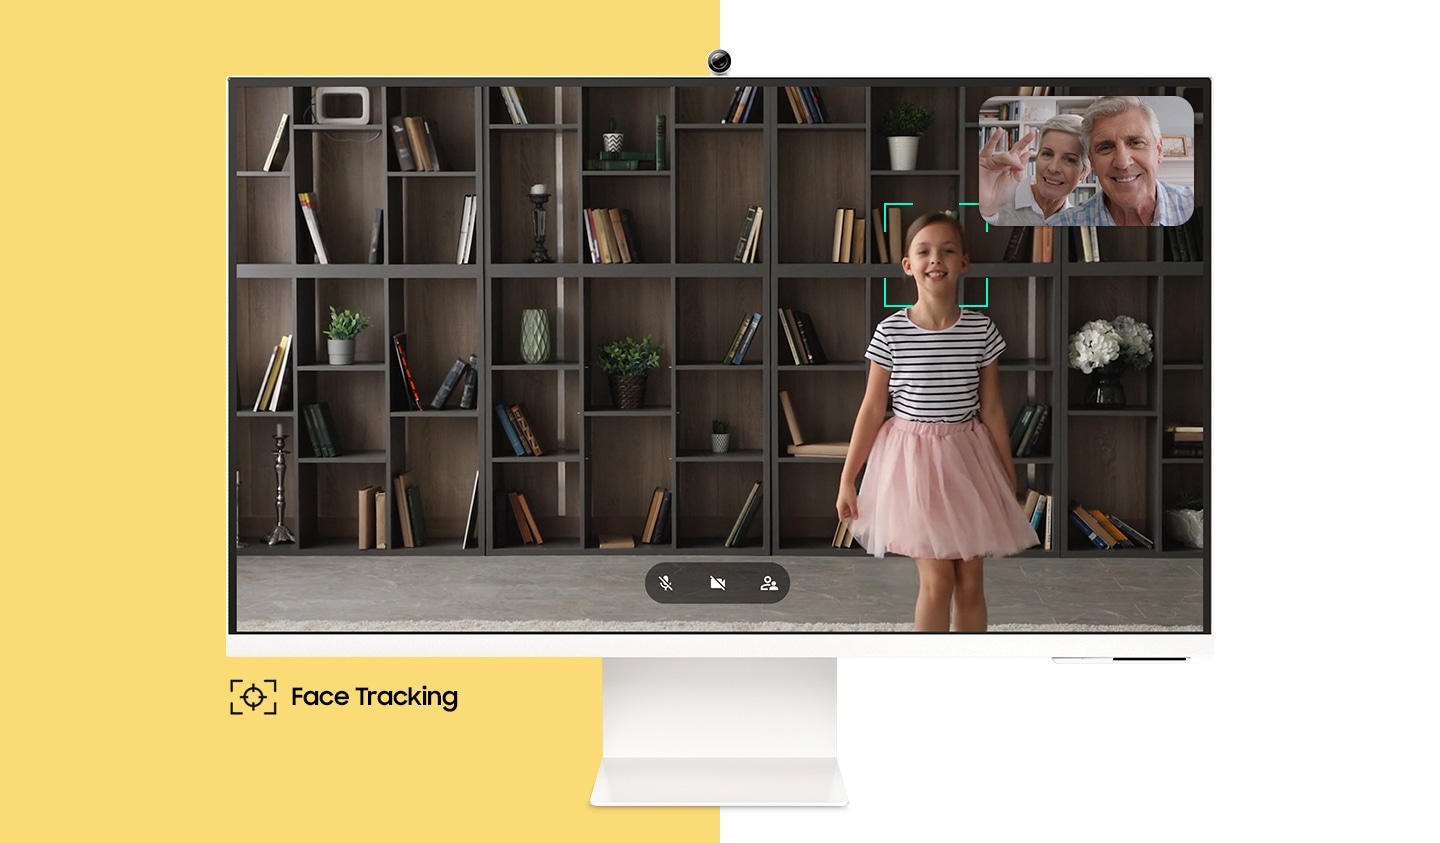 On the monitor screen, a girl is dancing, and in the upper right corner of the screen, her grandparents are smiling. There is a square mark around the girl's face, which also moves as she moves. And below the monitor, the text 'Face Tracking' appears with its icon.